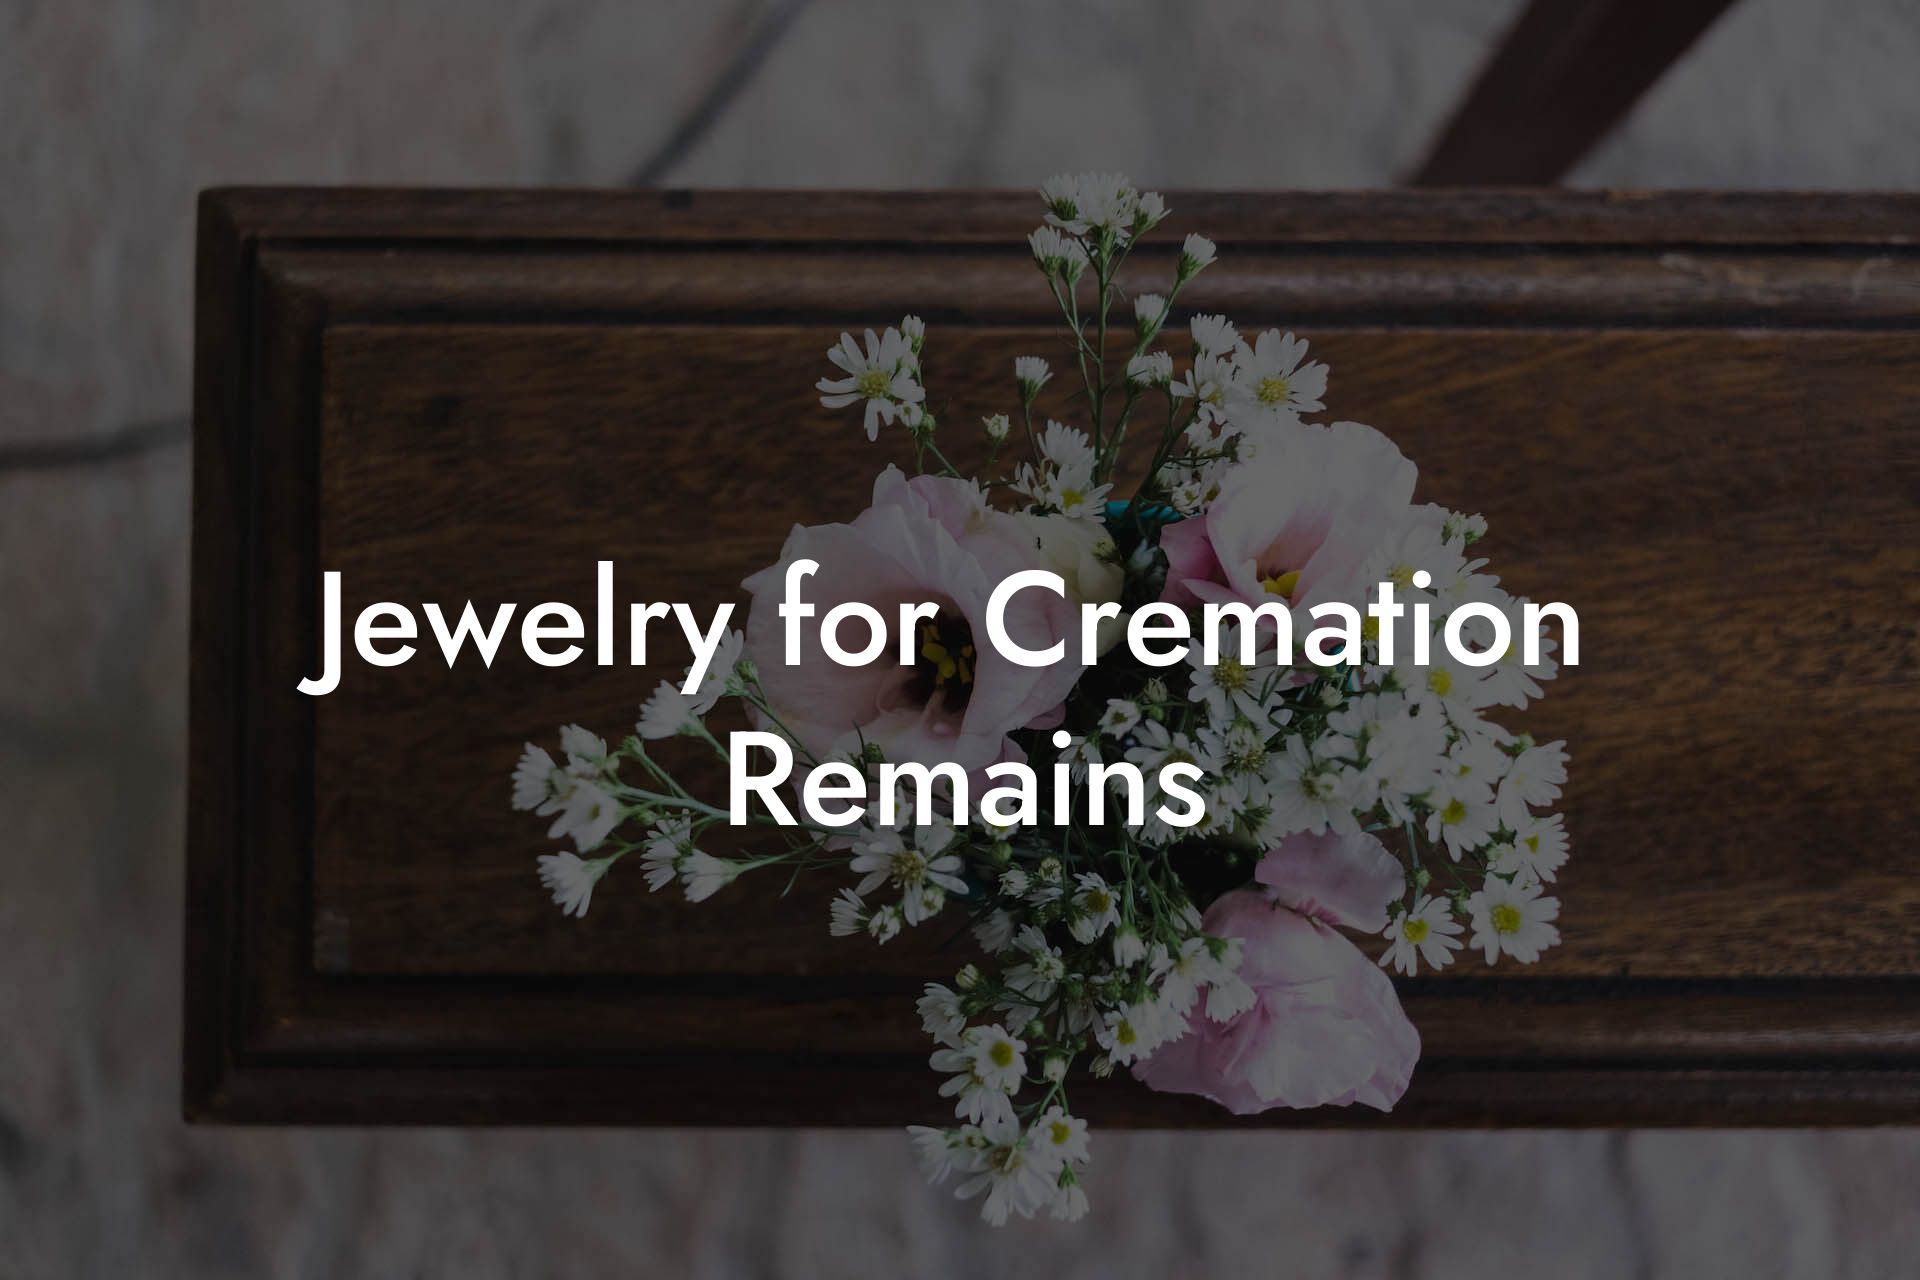 Jewelry for Cremation Remains